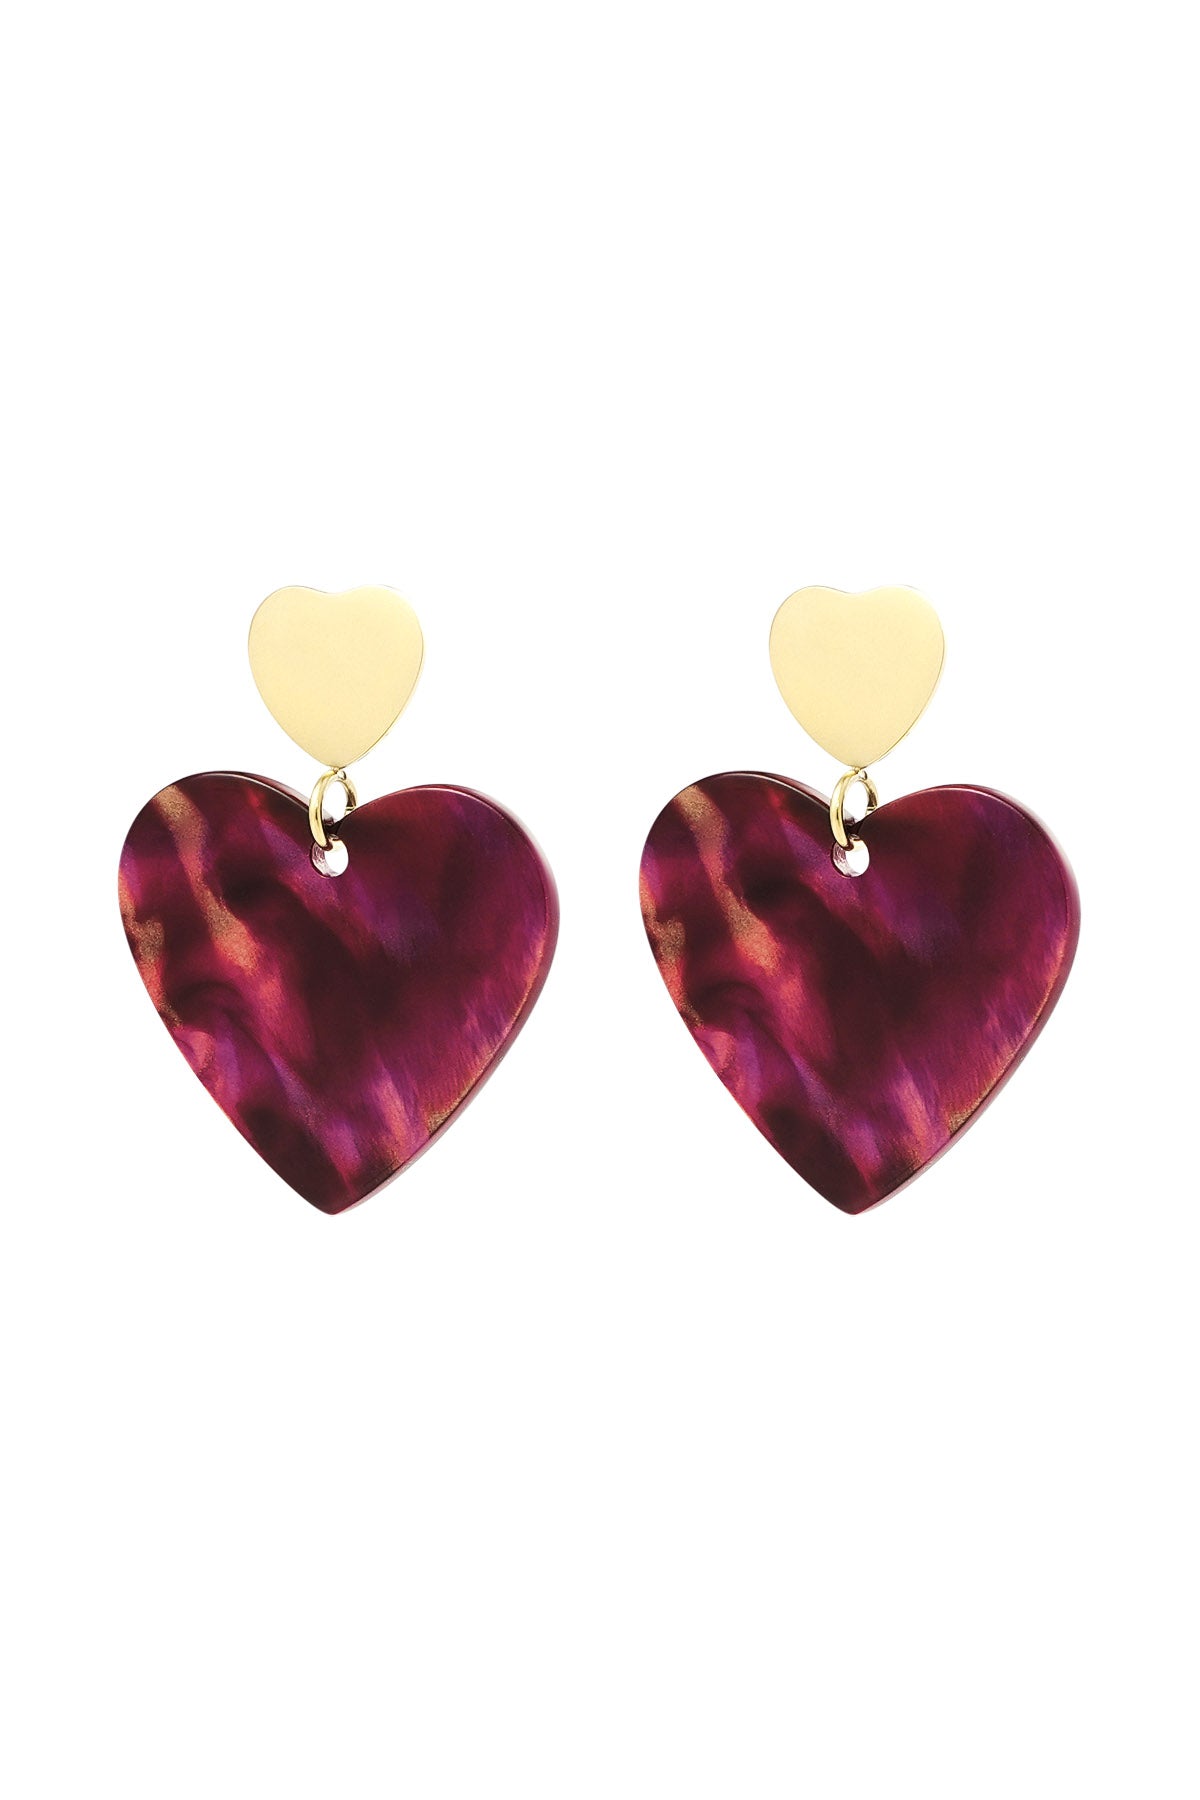 The Edit - Double Heart Earrings in Gold and Red